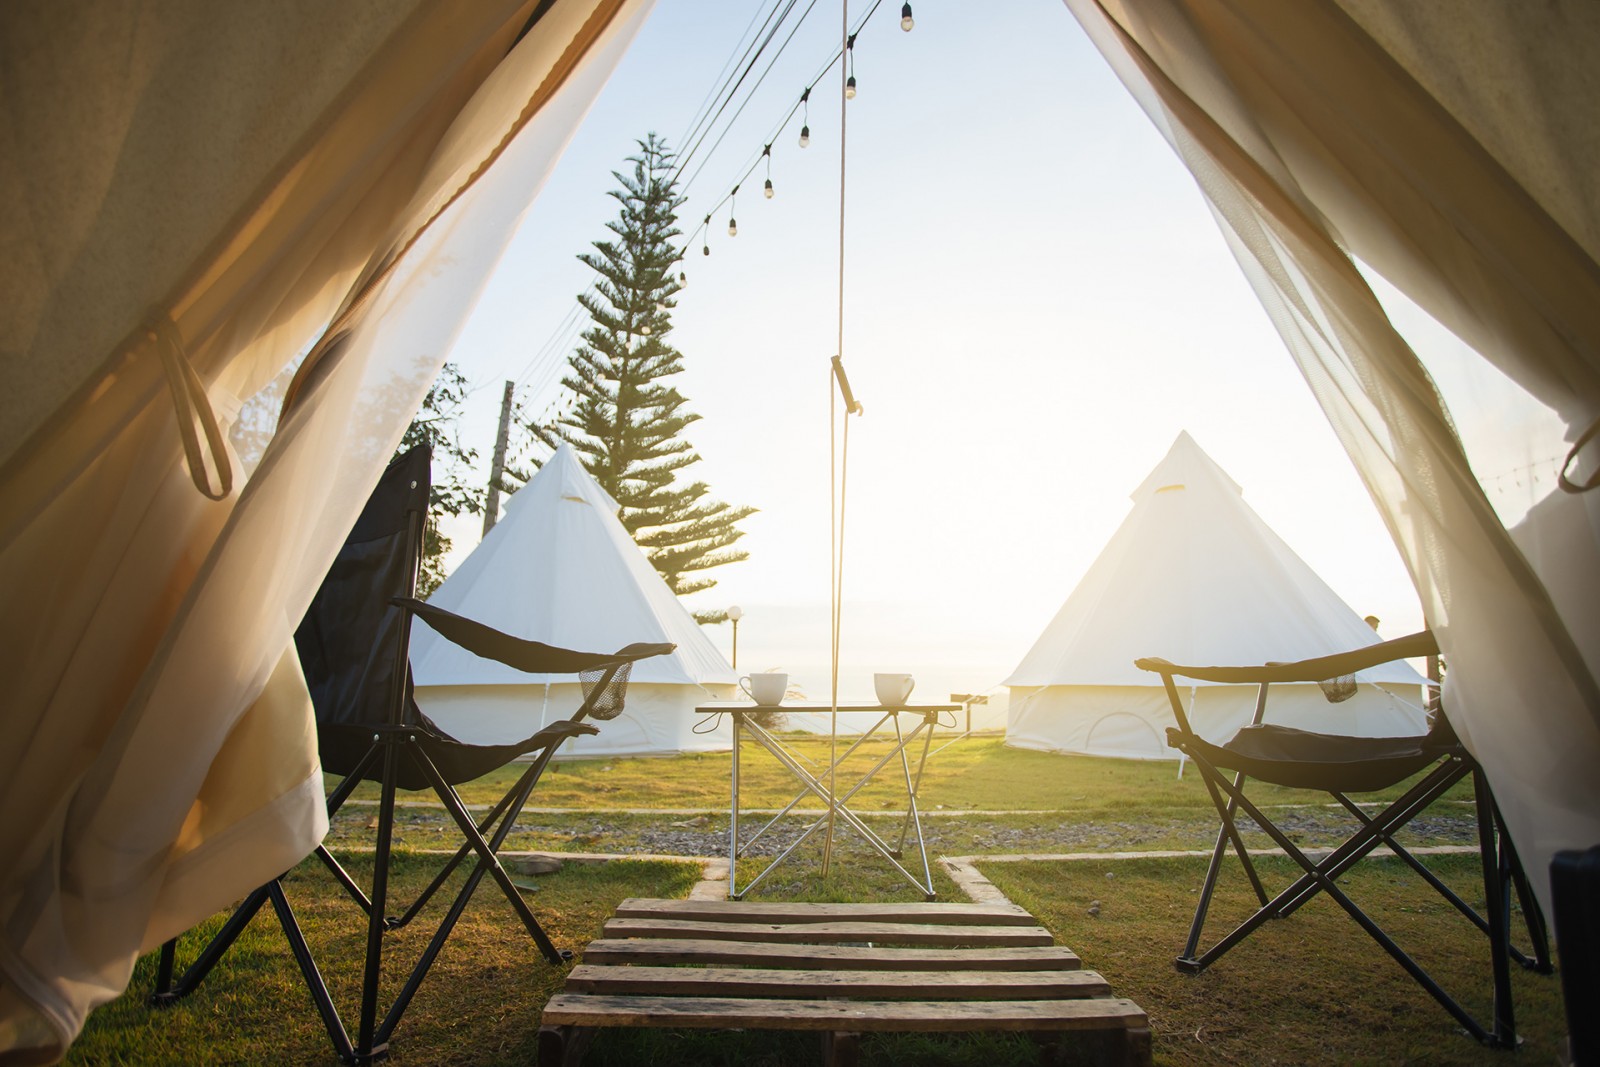 Glamping with Tipi tents